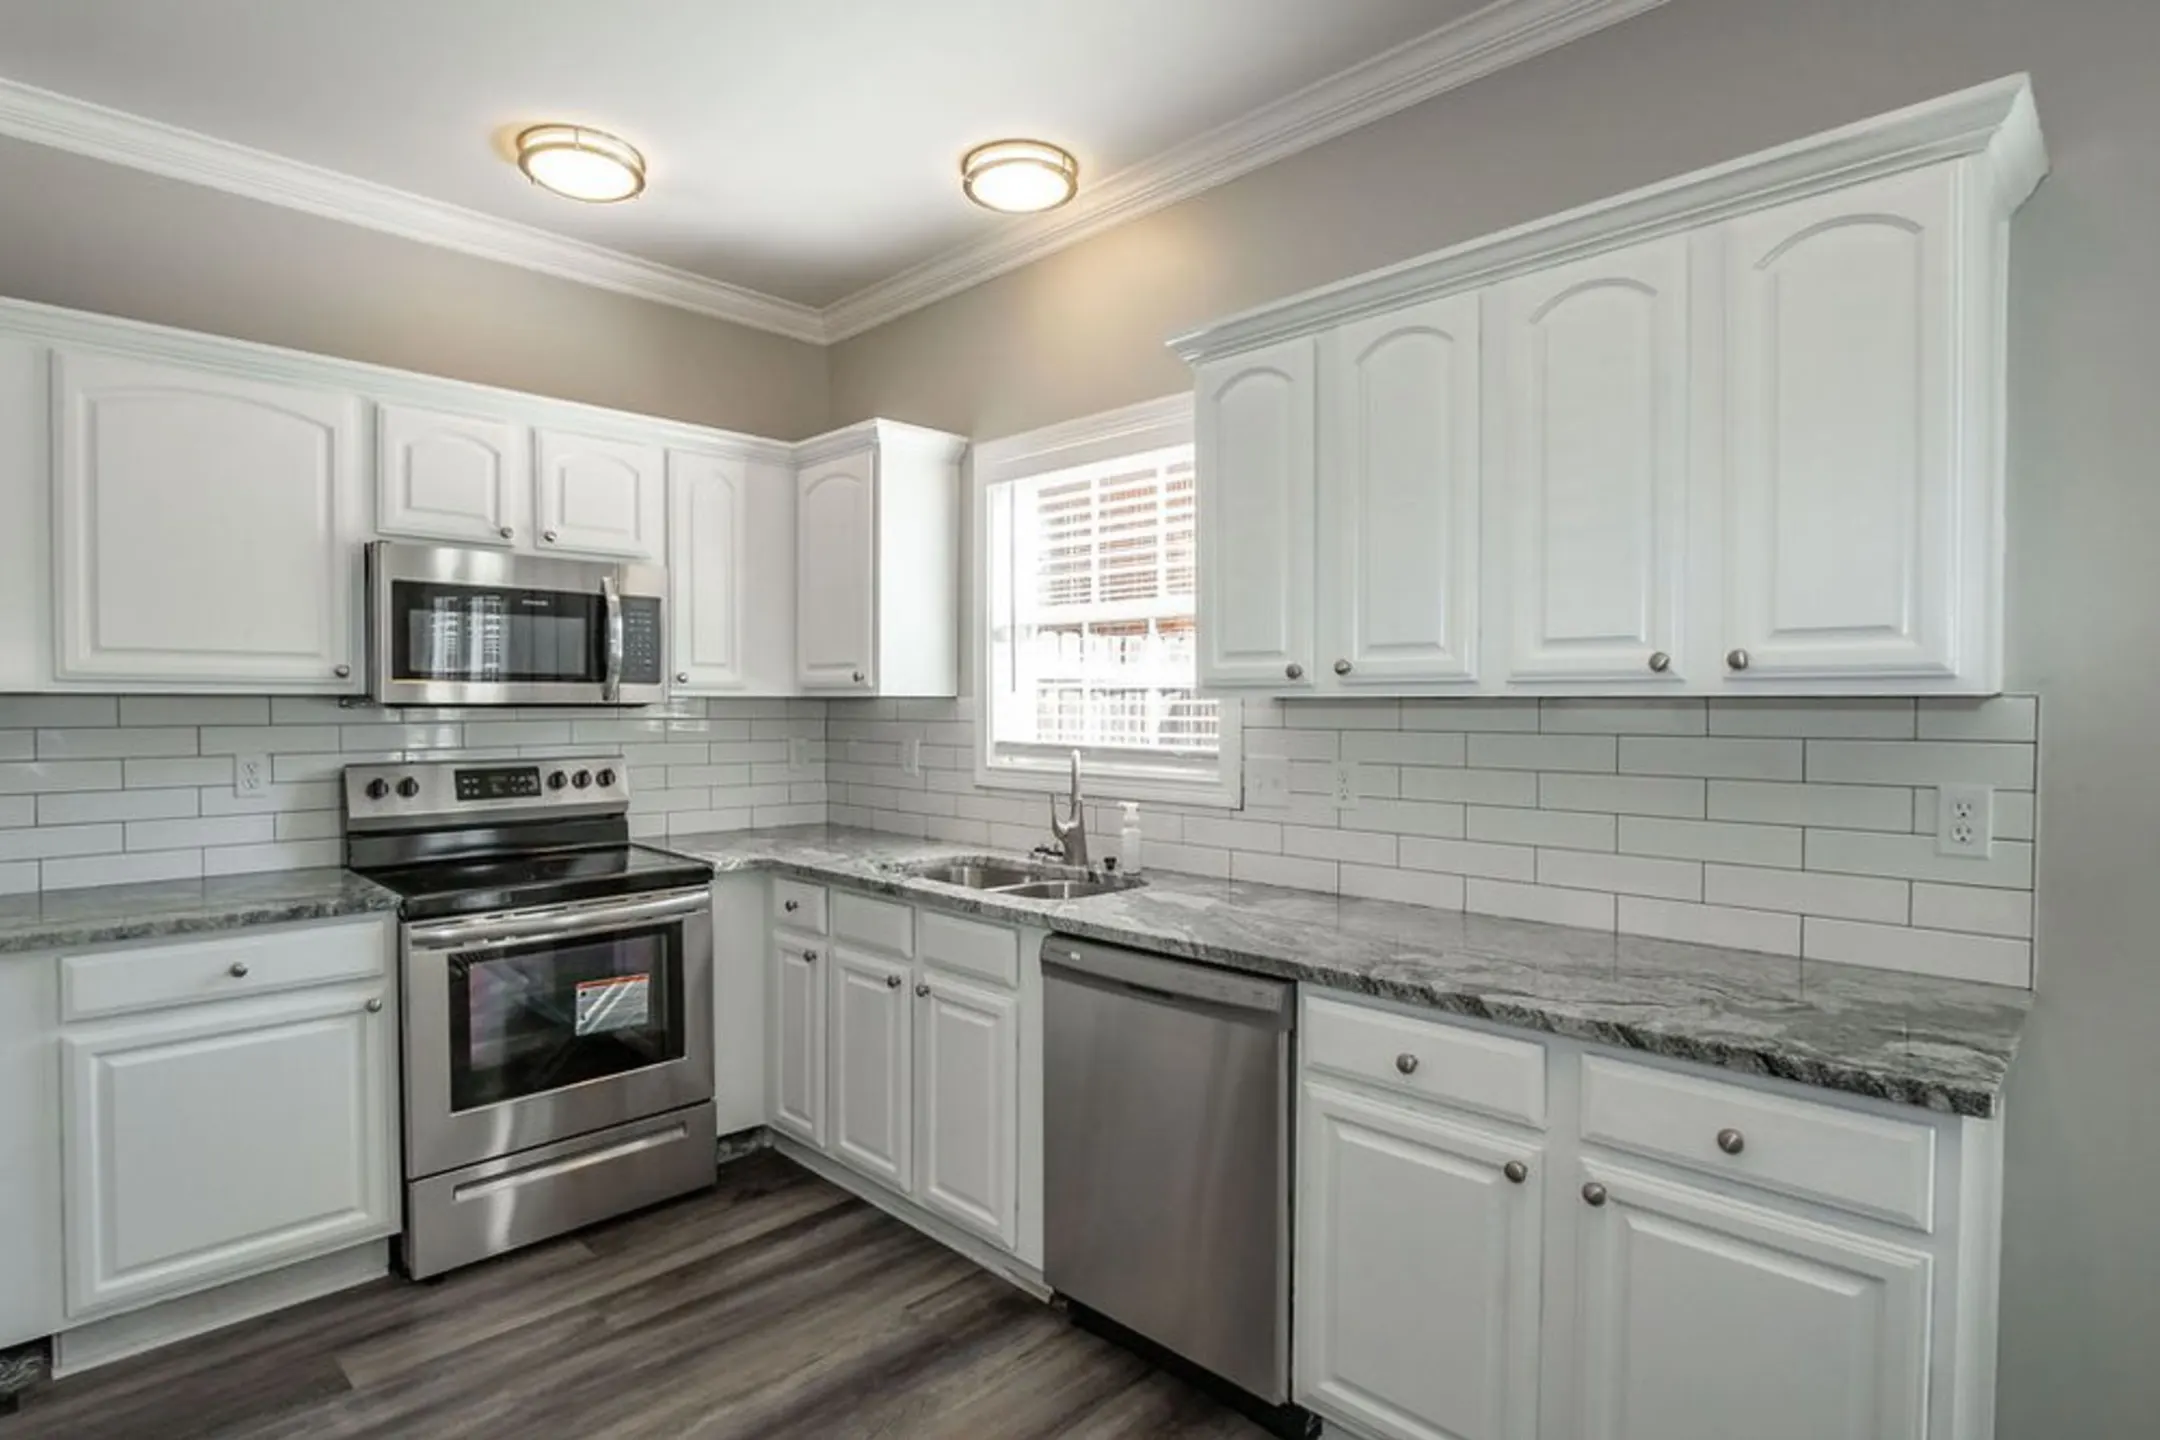 Kitchen - Old Todds Townhomes - Lexington, KY